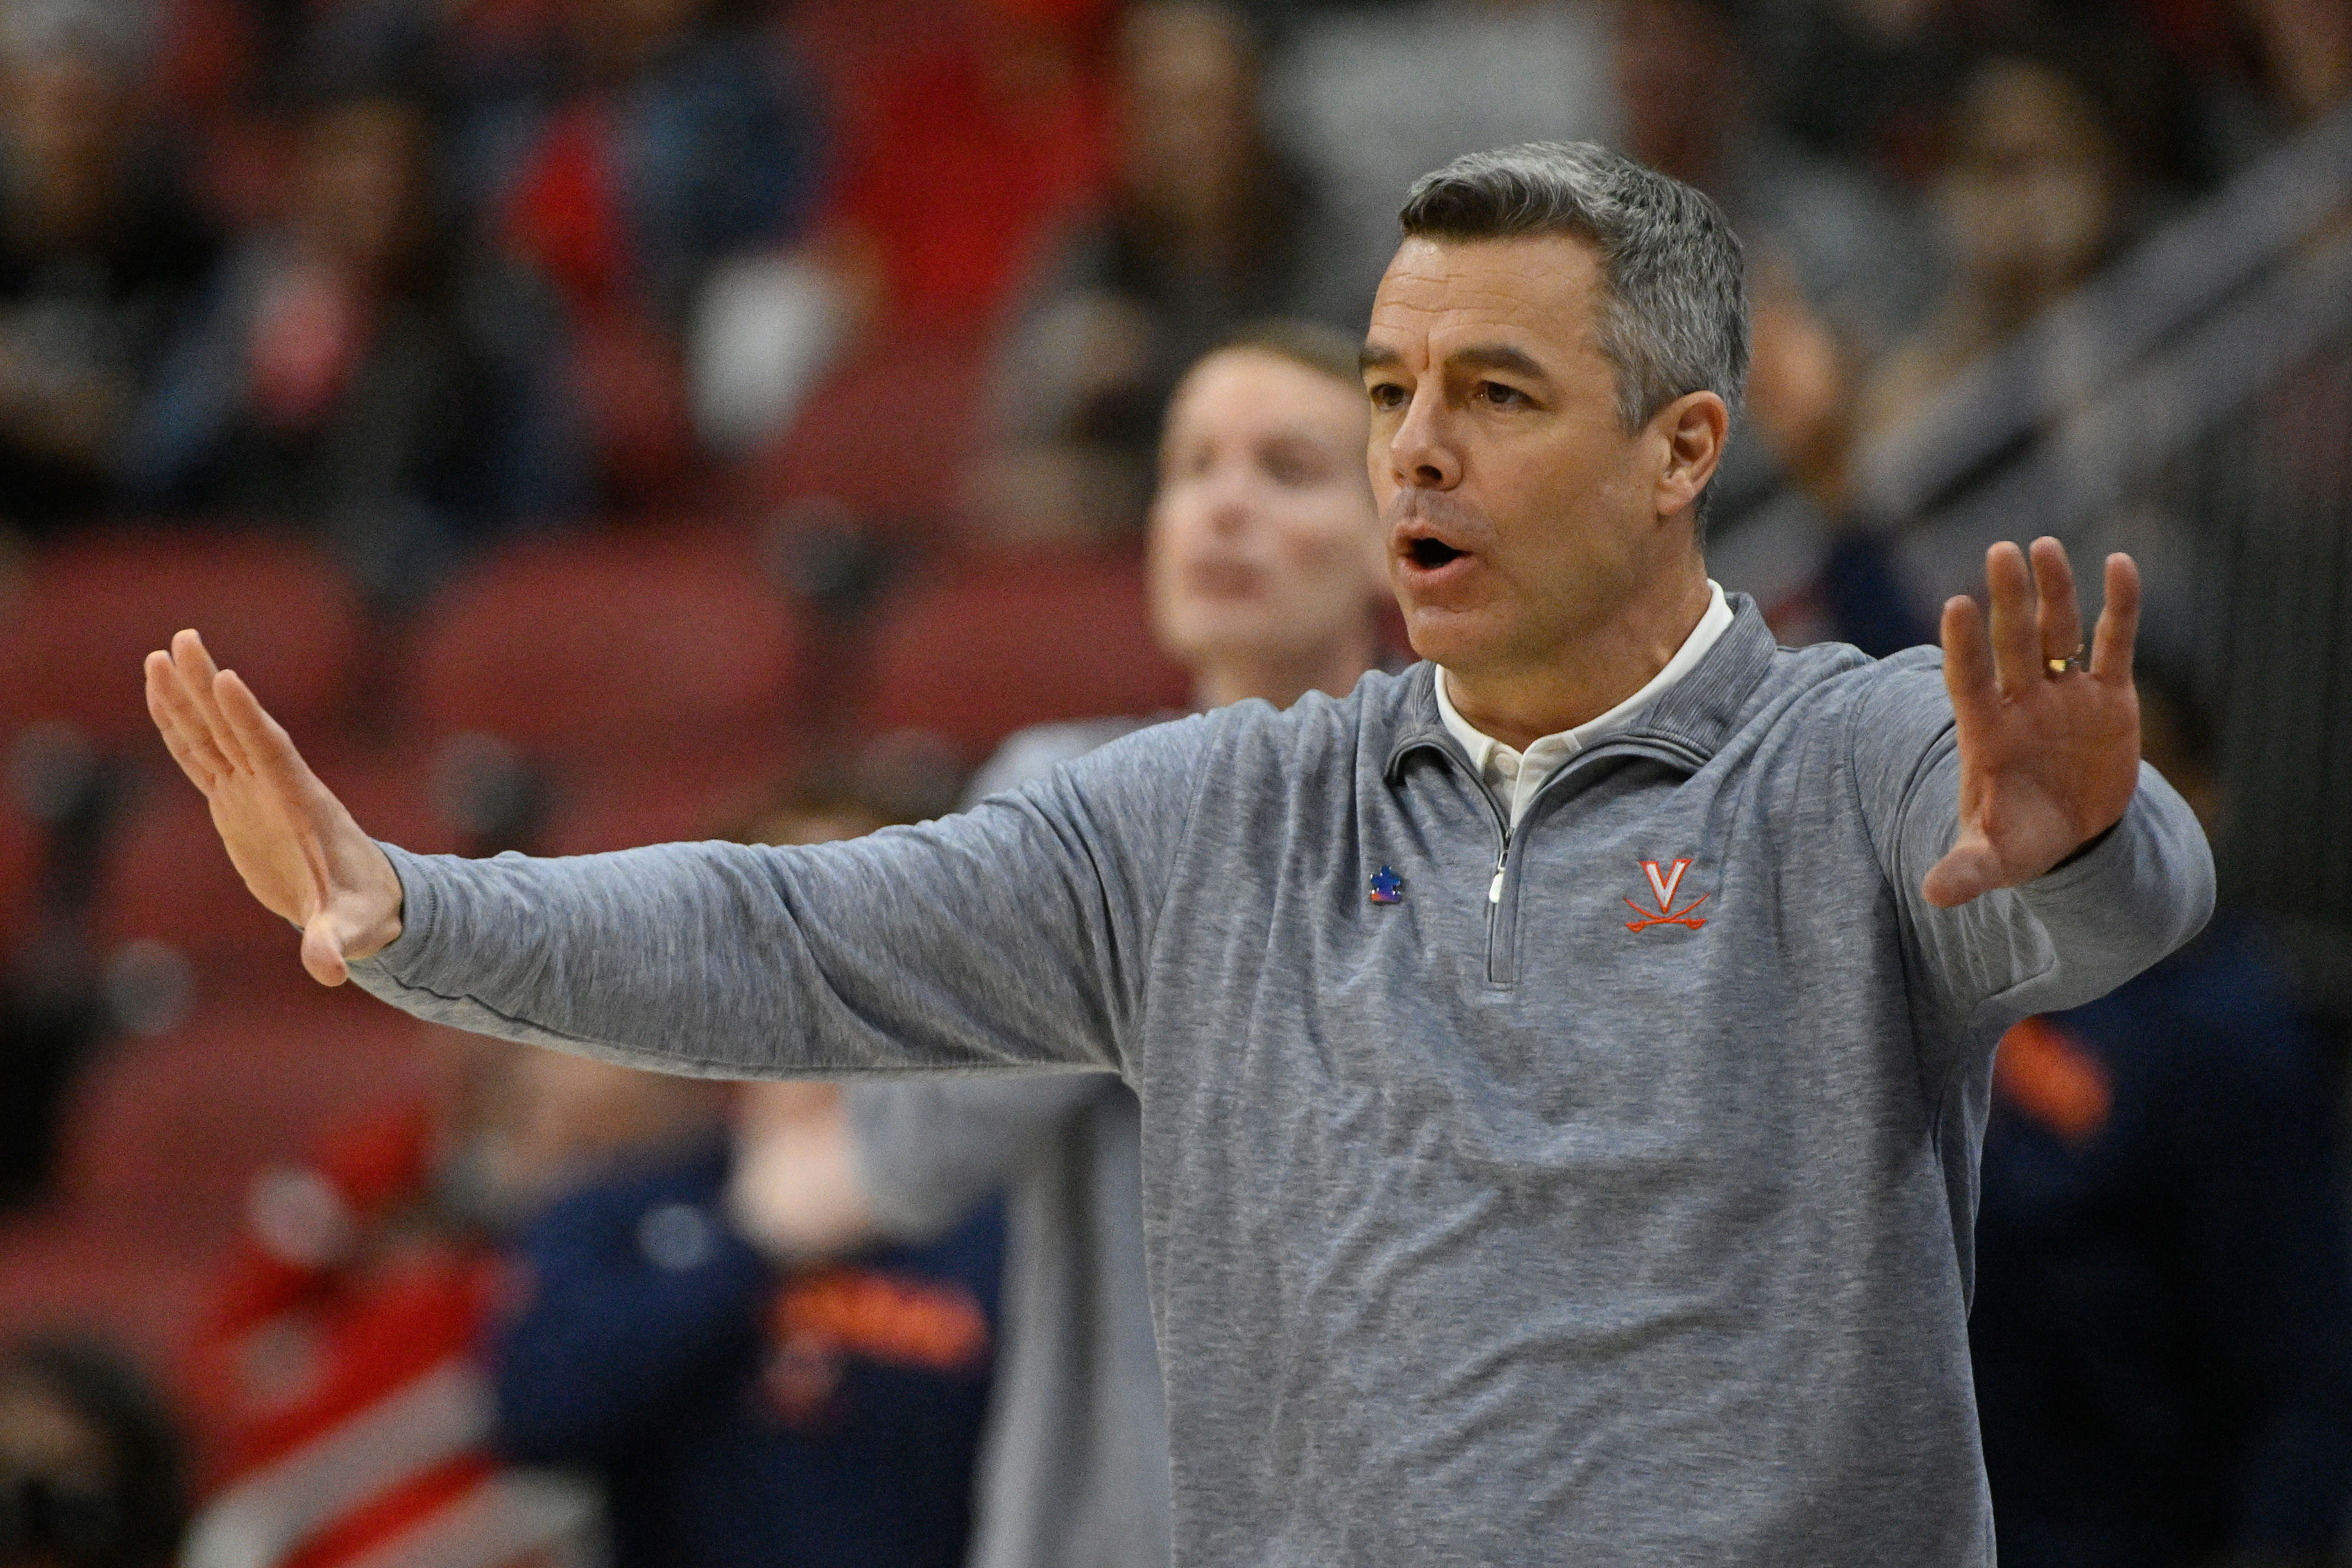 Tony Bennett looks to bounce back after a down year